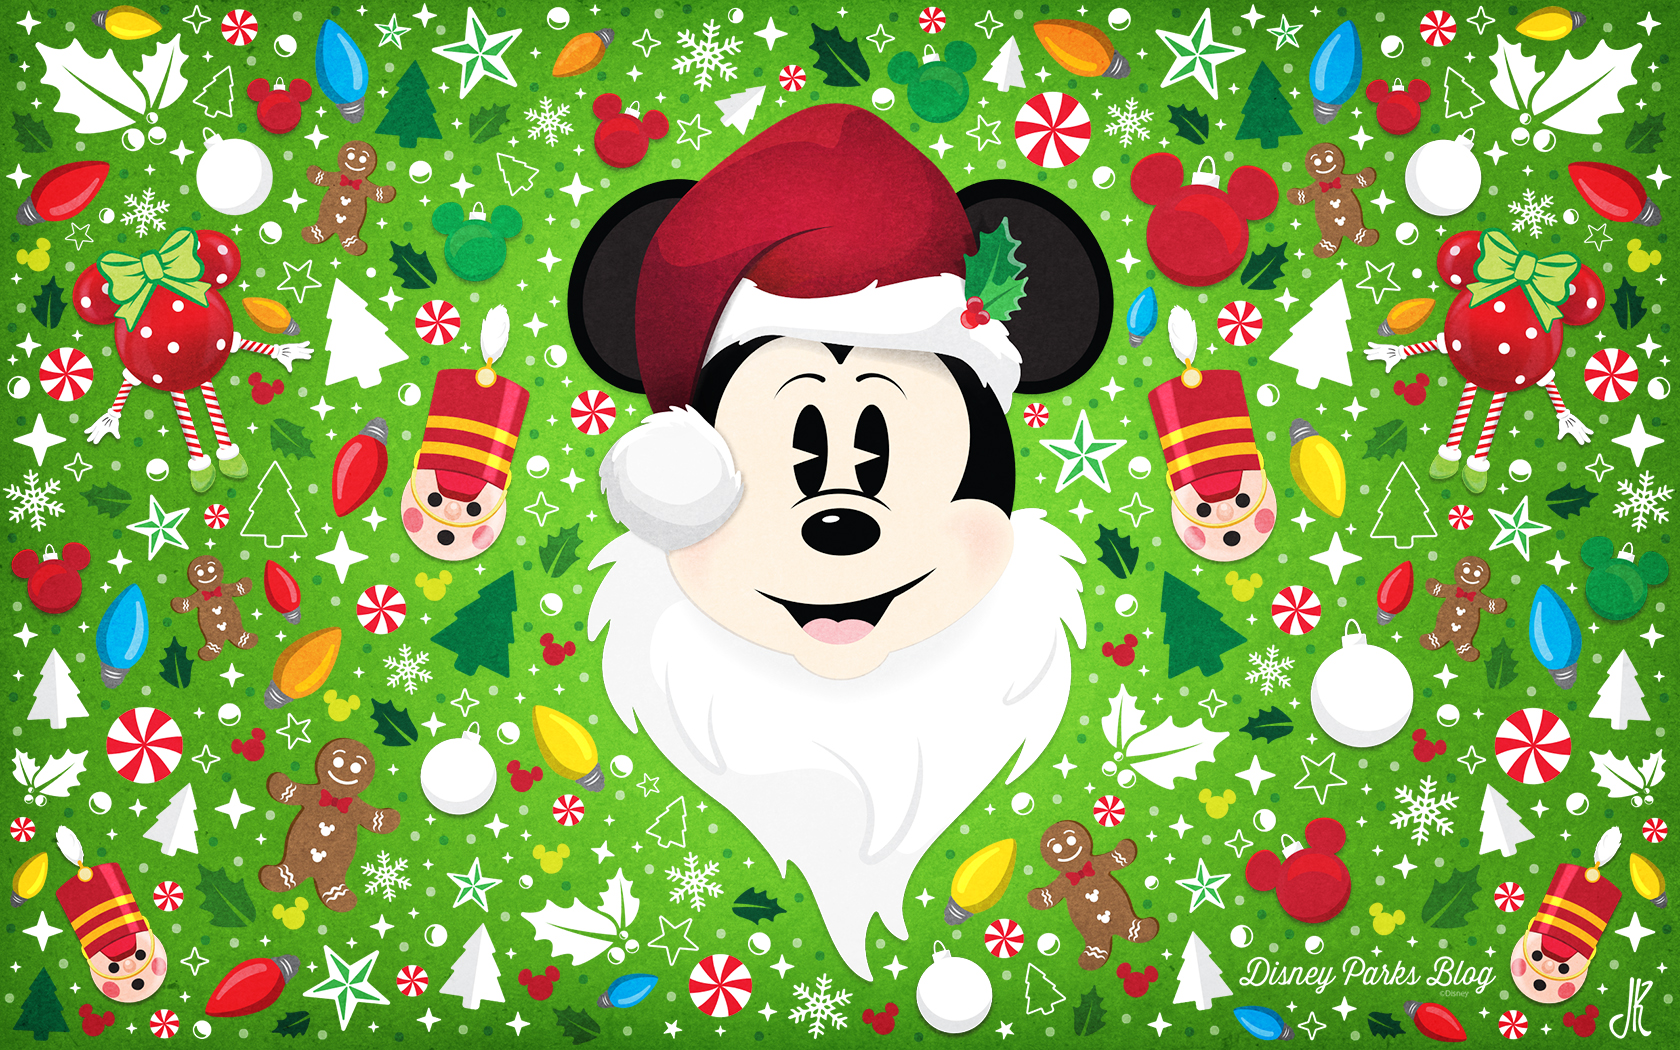 Get Excited For The Season With 18 Holiday Disney Parks Blog